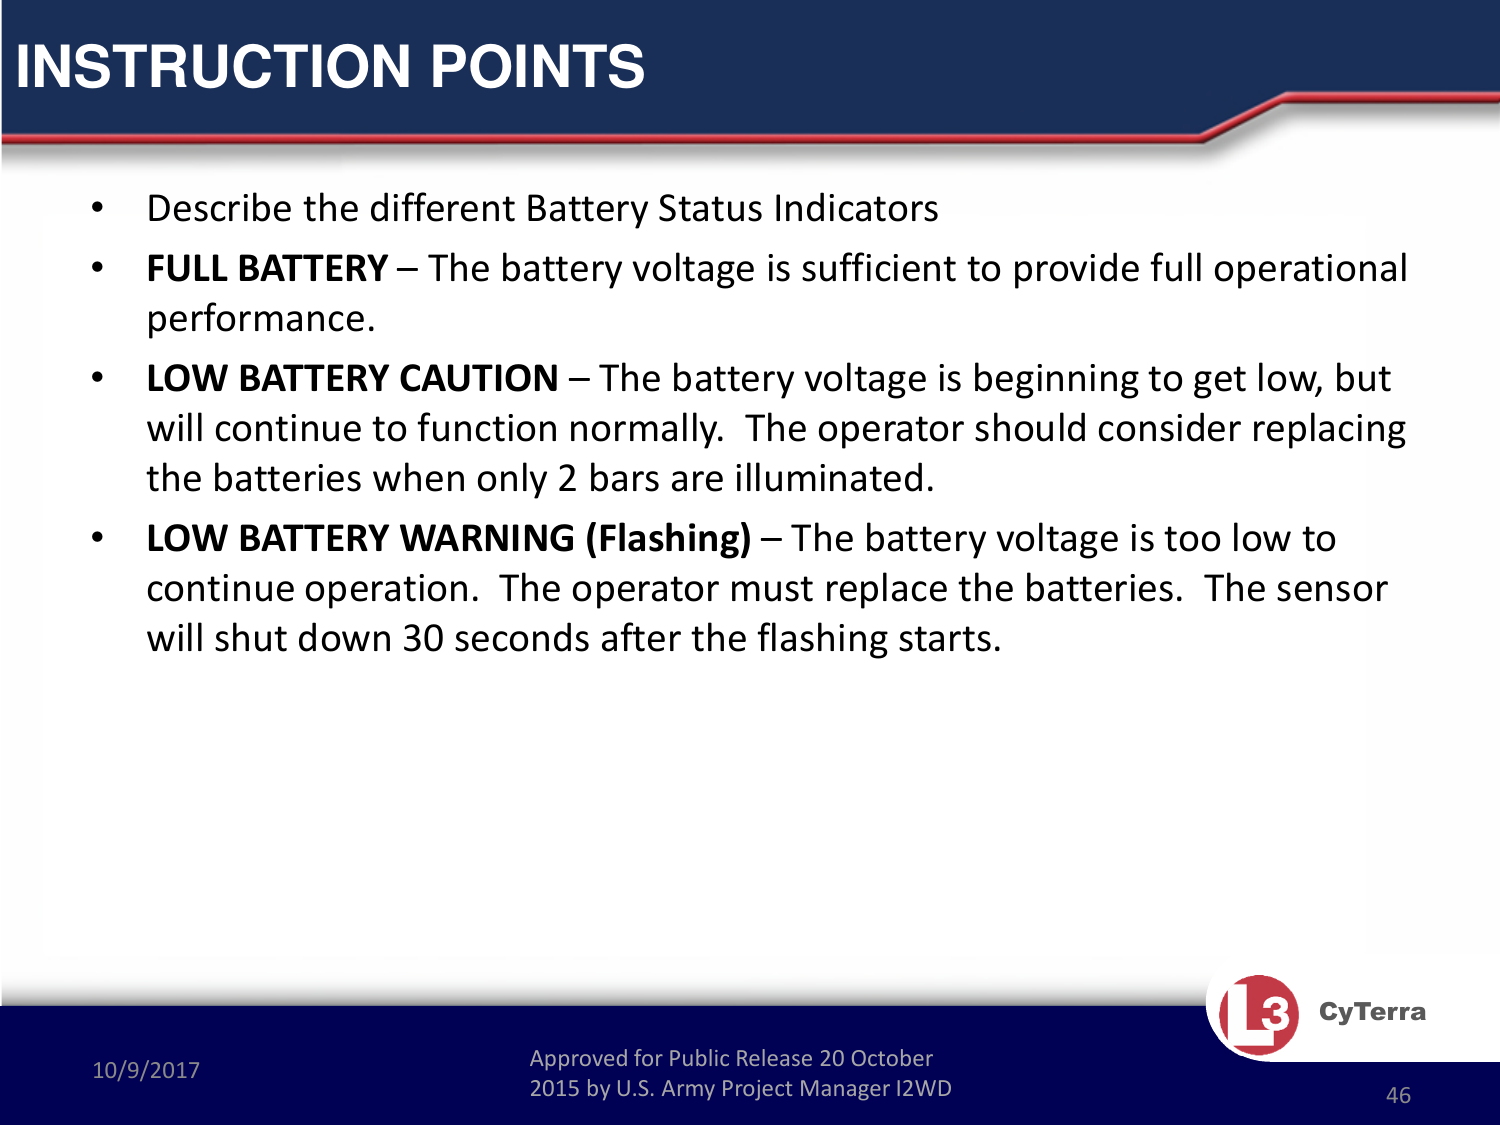 Approved for Public Release 20 October 2015 by U.S. Army Project Manager I2WD10/9/2017 Approved for Public Release 20 October 2015 by U.S. Army Project Manager I2WD 46CyTerra•Describe the different Battery Status Indicators•FULL BATTERY – The battery voltage is sufficient to provide full operational performance.•LOW BATTERY CAUTION – The battery voltage is beginning to get low, but will continue to function normally.  The operator should consider replacing the batteries when only 2 bars are illuminated.•LOW BATTERY WARNING (Flashing) – The battery voltage is too low to continue operation.  The operator must replace the batteries.  The sensor will shut down 30 seconds after the flashing starts. INSTRUCTION POINTS